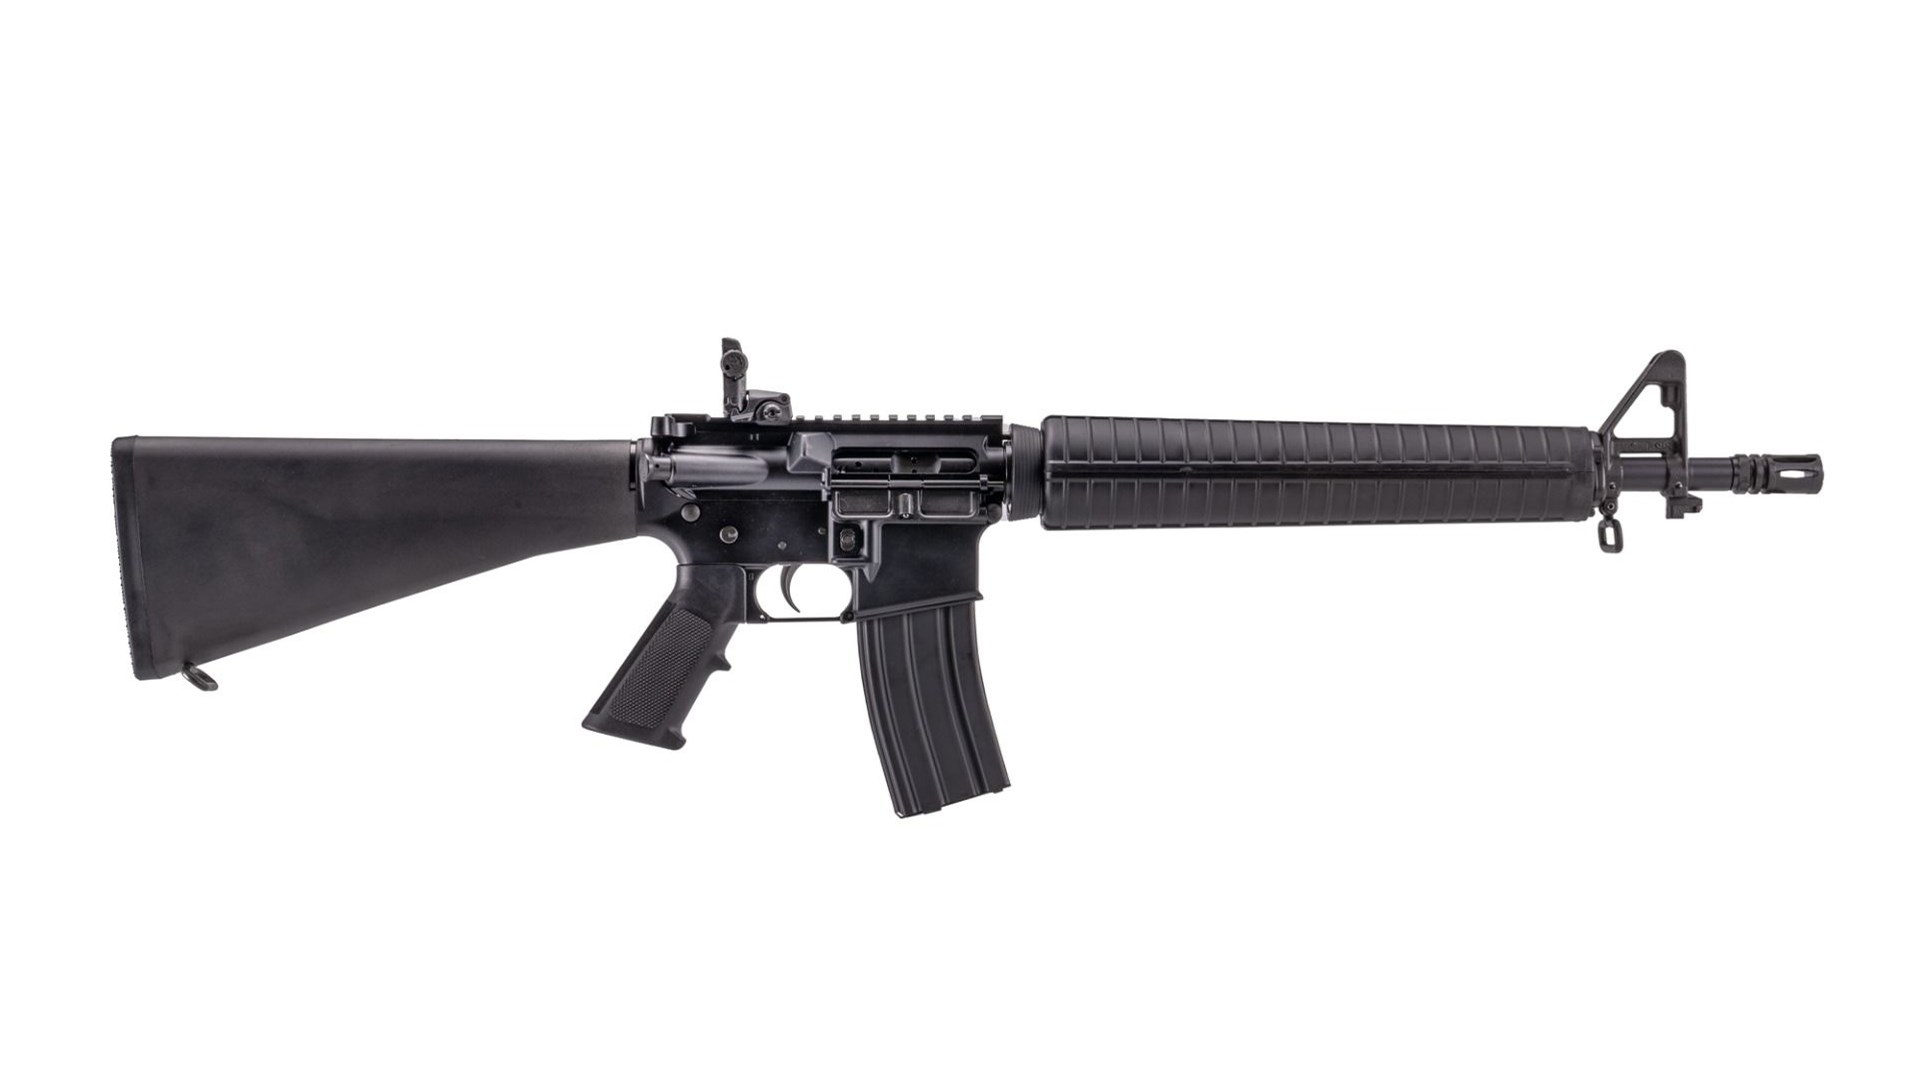 Right side of the all-black Anderson AM-15 Dissipator AR-15.